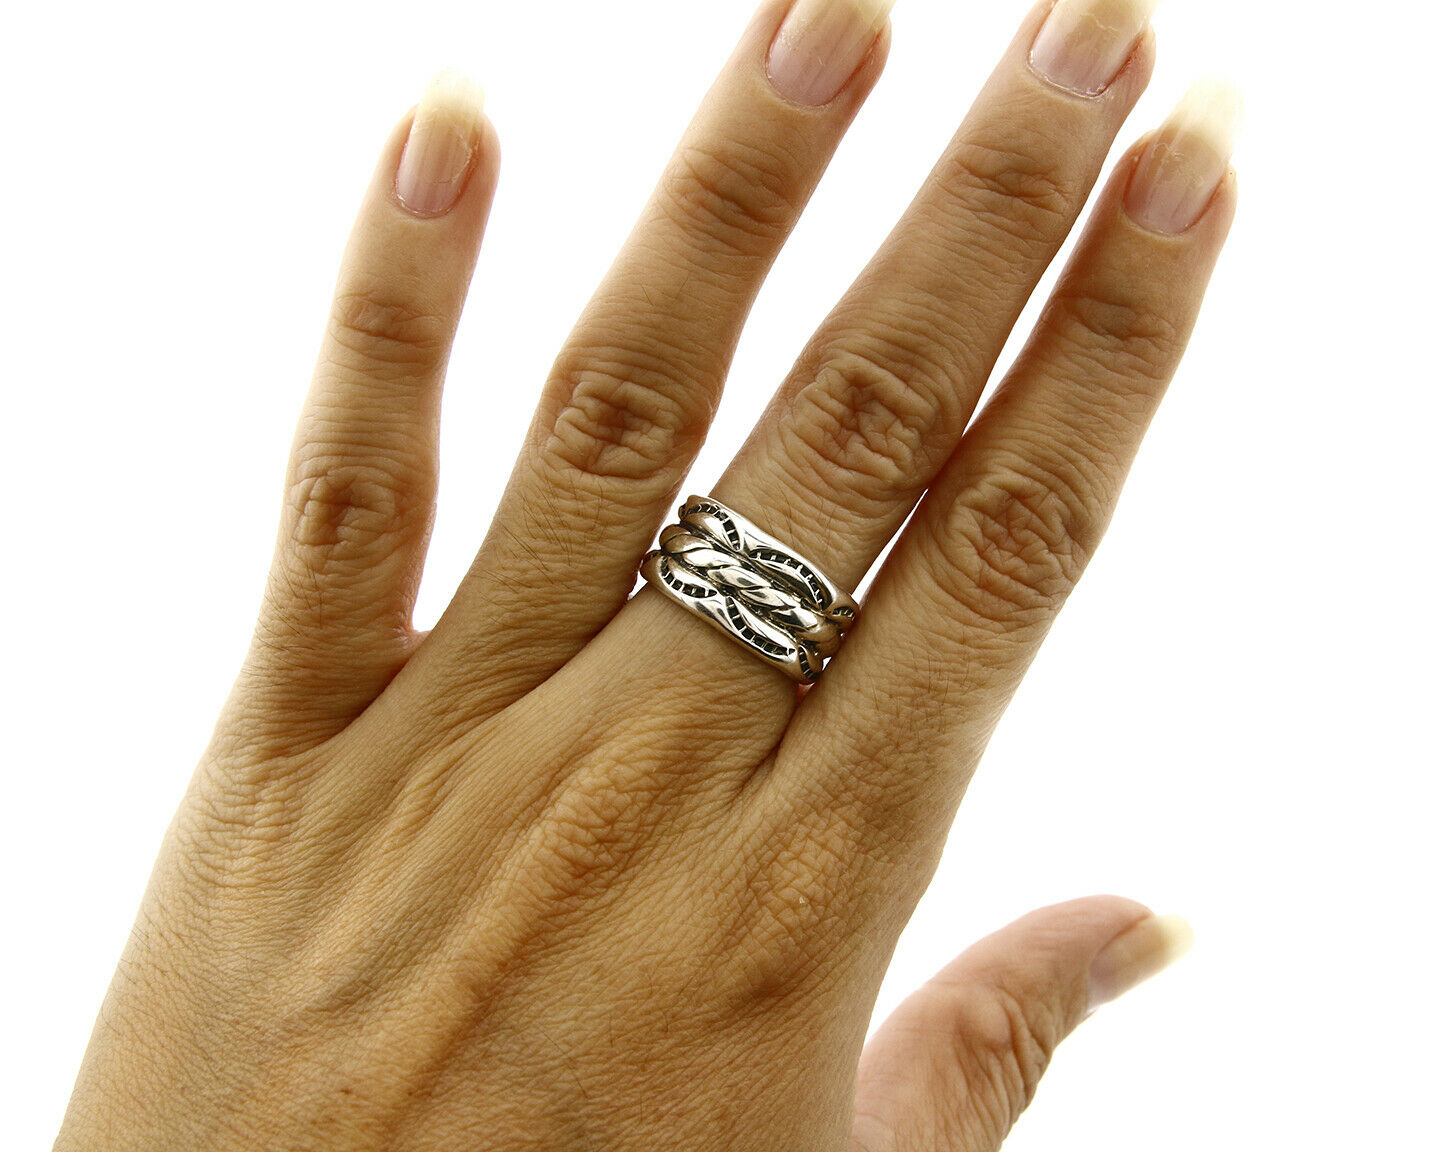 Navajo Ring .925 Silver Handmade Hand Stamped 3 Row Rope Band C.1980's Size 5.25